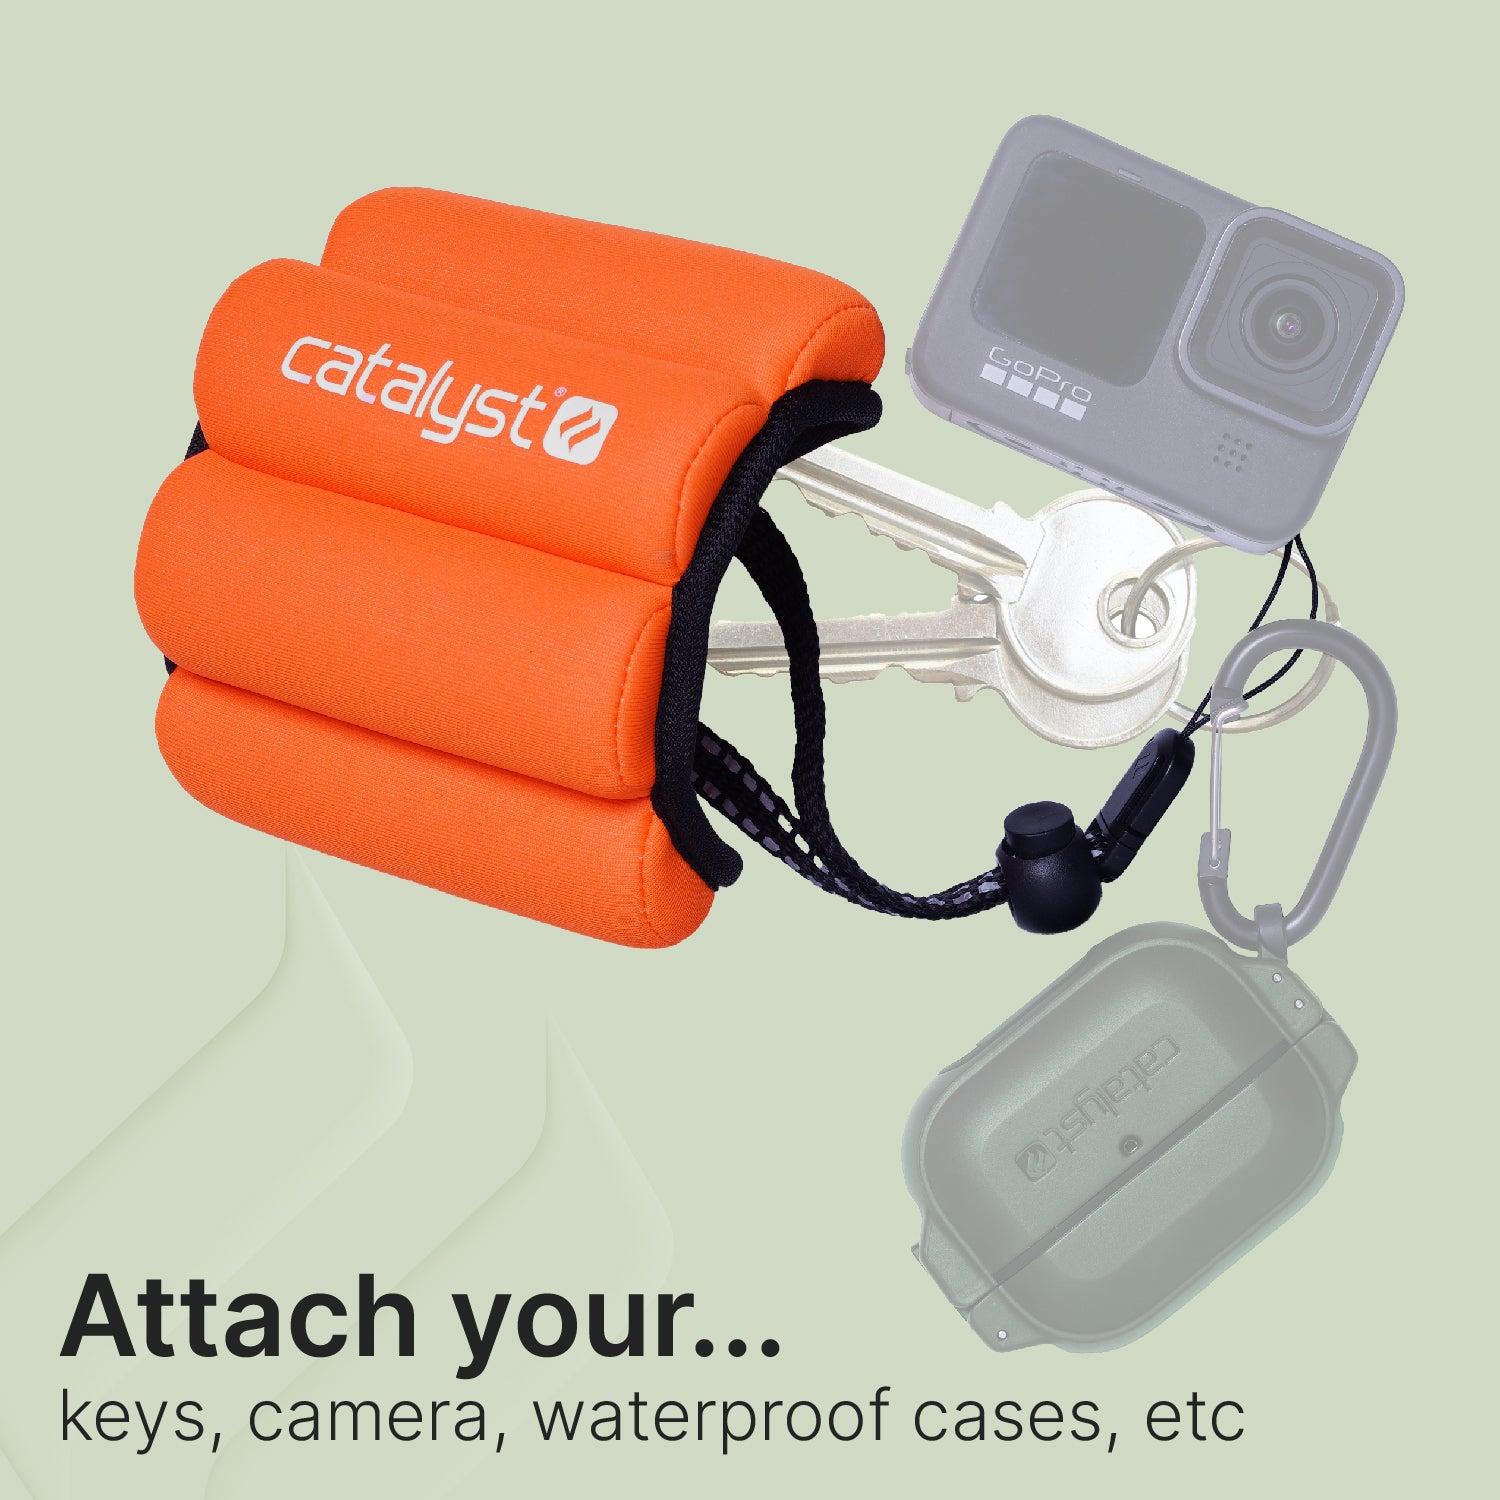 Catalyst orange floating wrist lanyard attached to keys airpods pro case Text reads attach your key, camera, waterproof cases, etc.